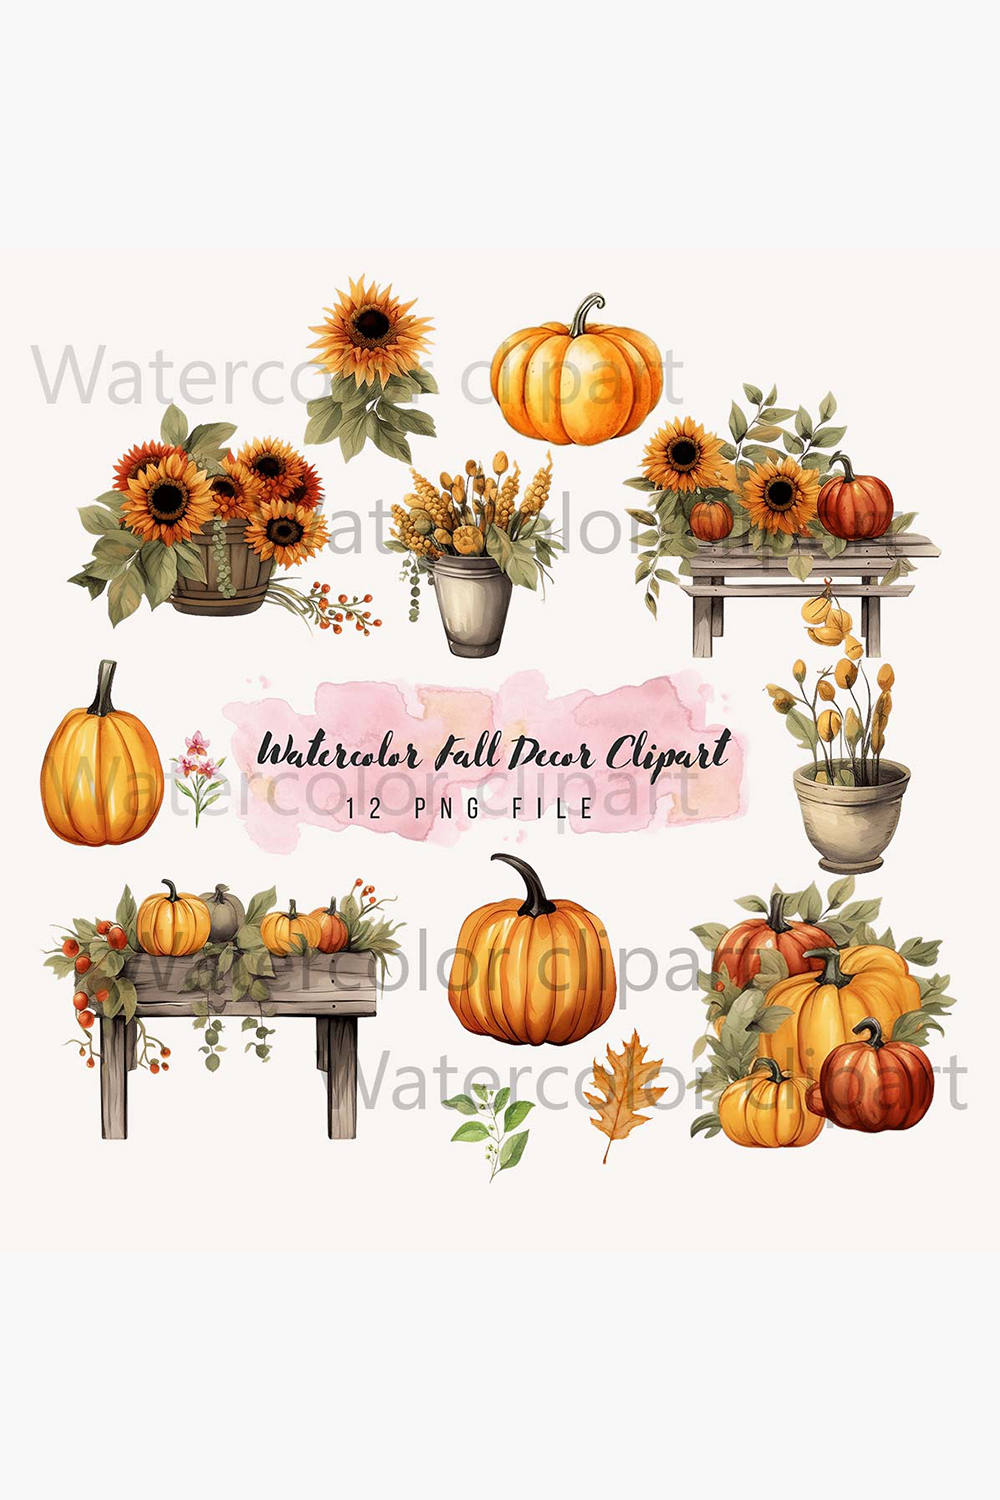 Bundle of 12 autumn elements, Watercolor Fall Decor Clipart - autumn watercolor in PNG format instant download pinterest preview image.